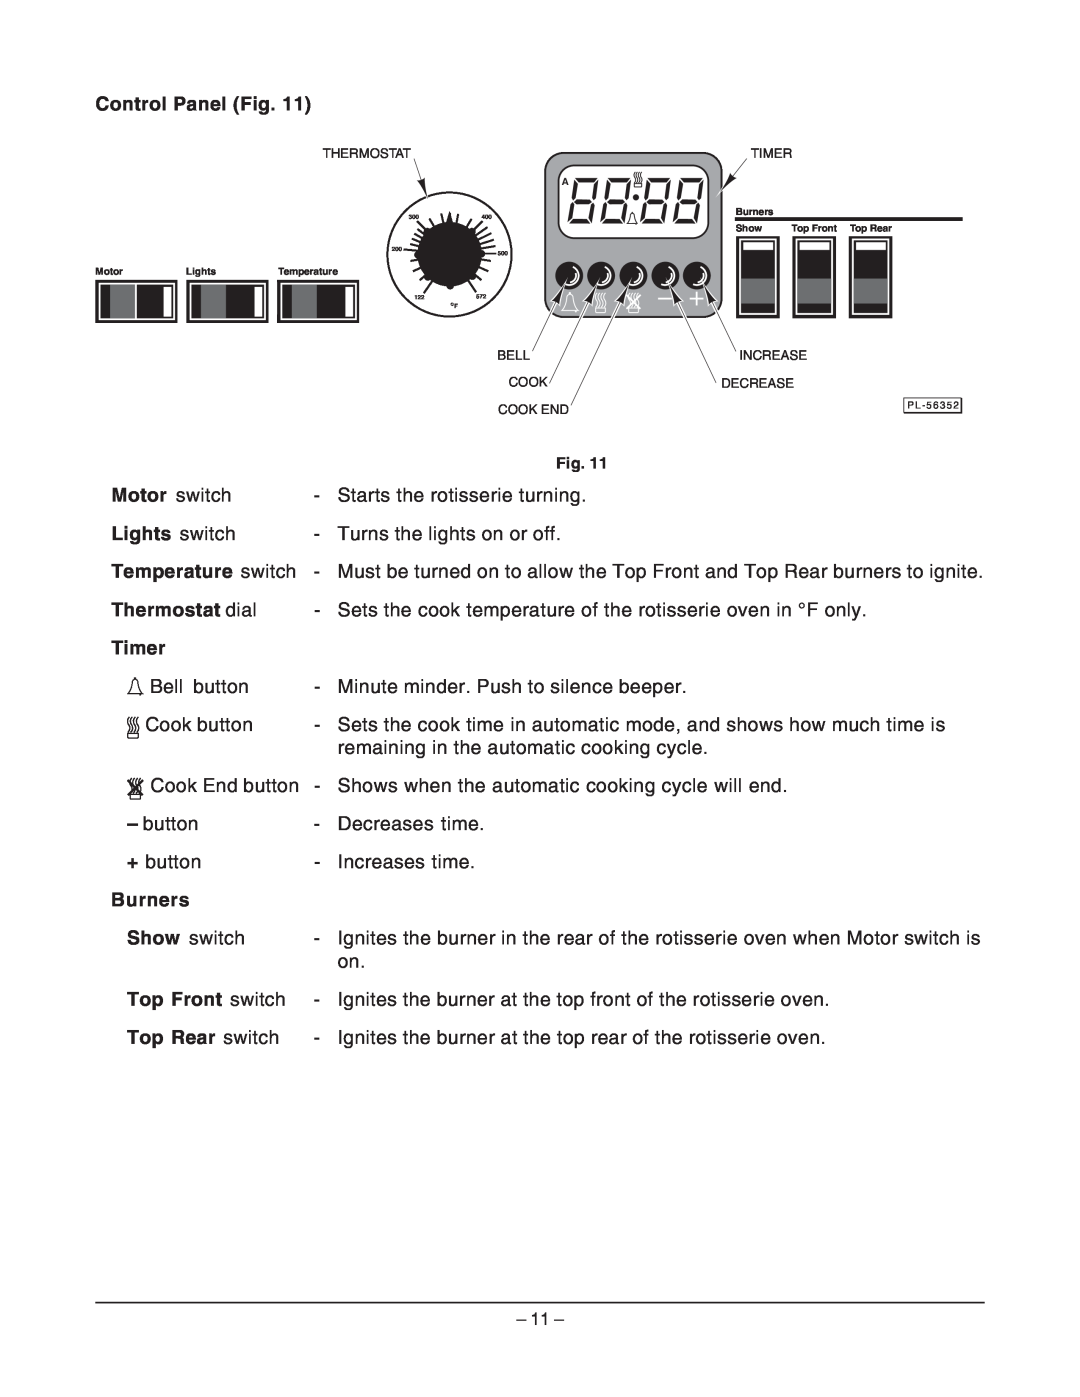 Hobart ML-132055 manual Control Panel Fig, Motor switch, Lights switch, Temperature switch, Thermostat dial, Timer, Burners 